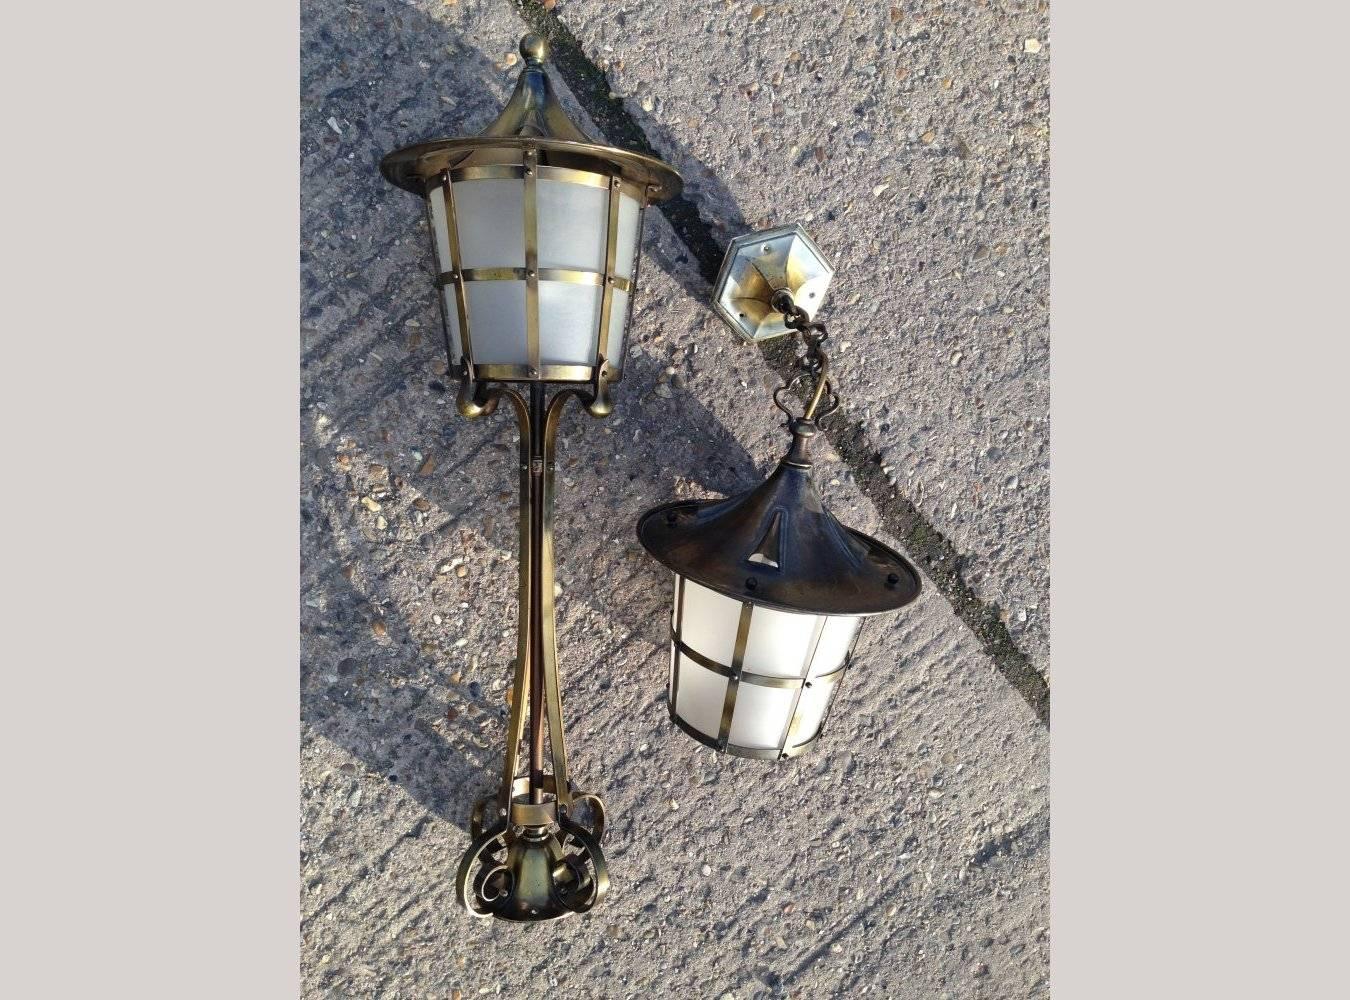 An Arts and Crafts copper stair post lantern with matching hall lantern.
Height 30 1/4, height hall lantern 13 1/2